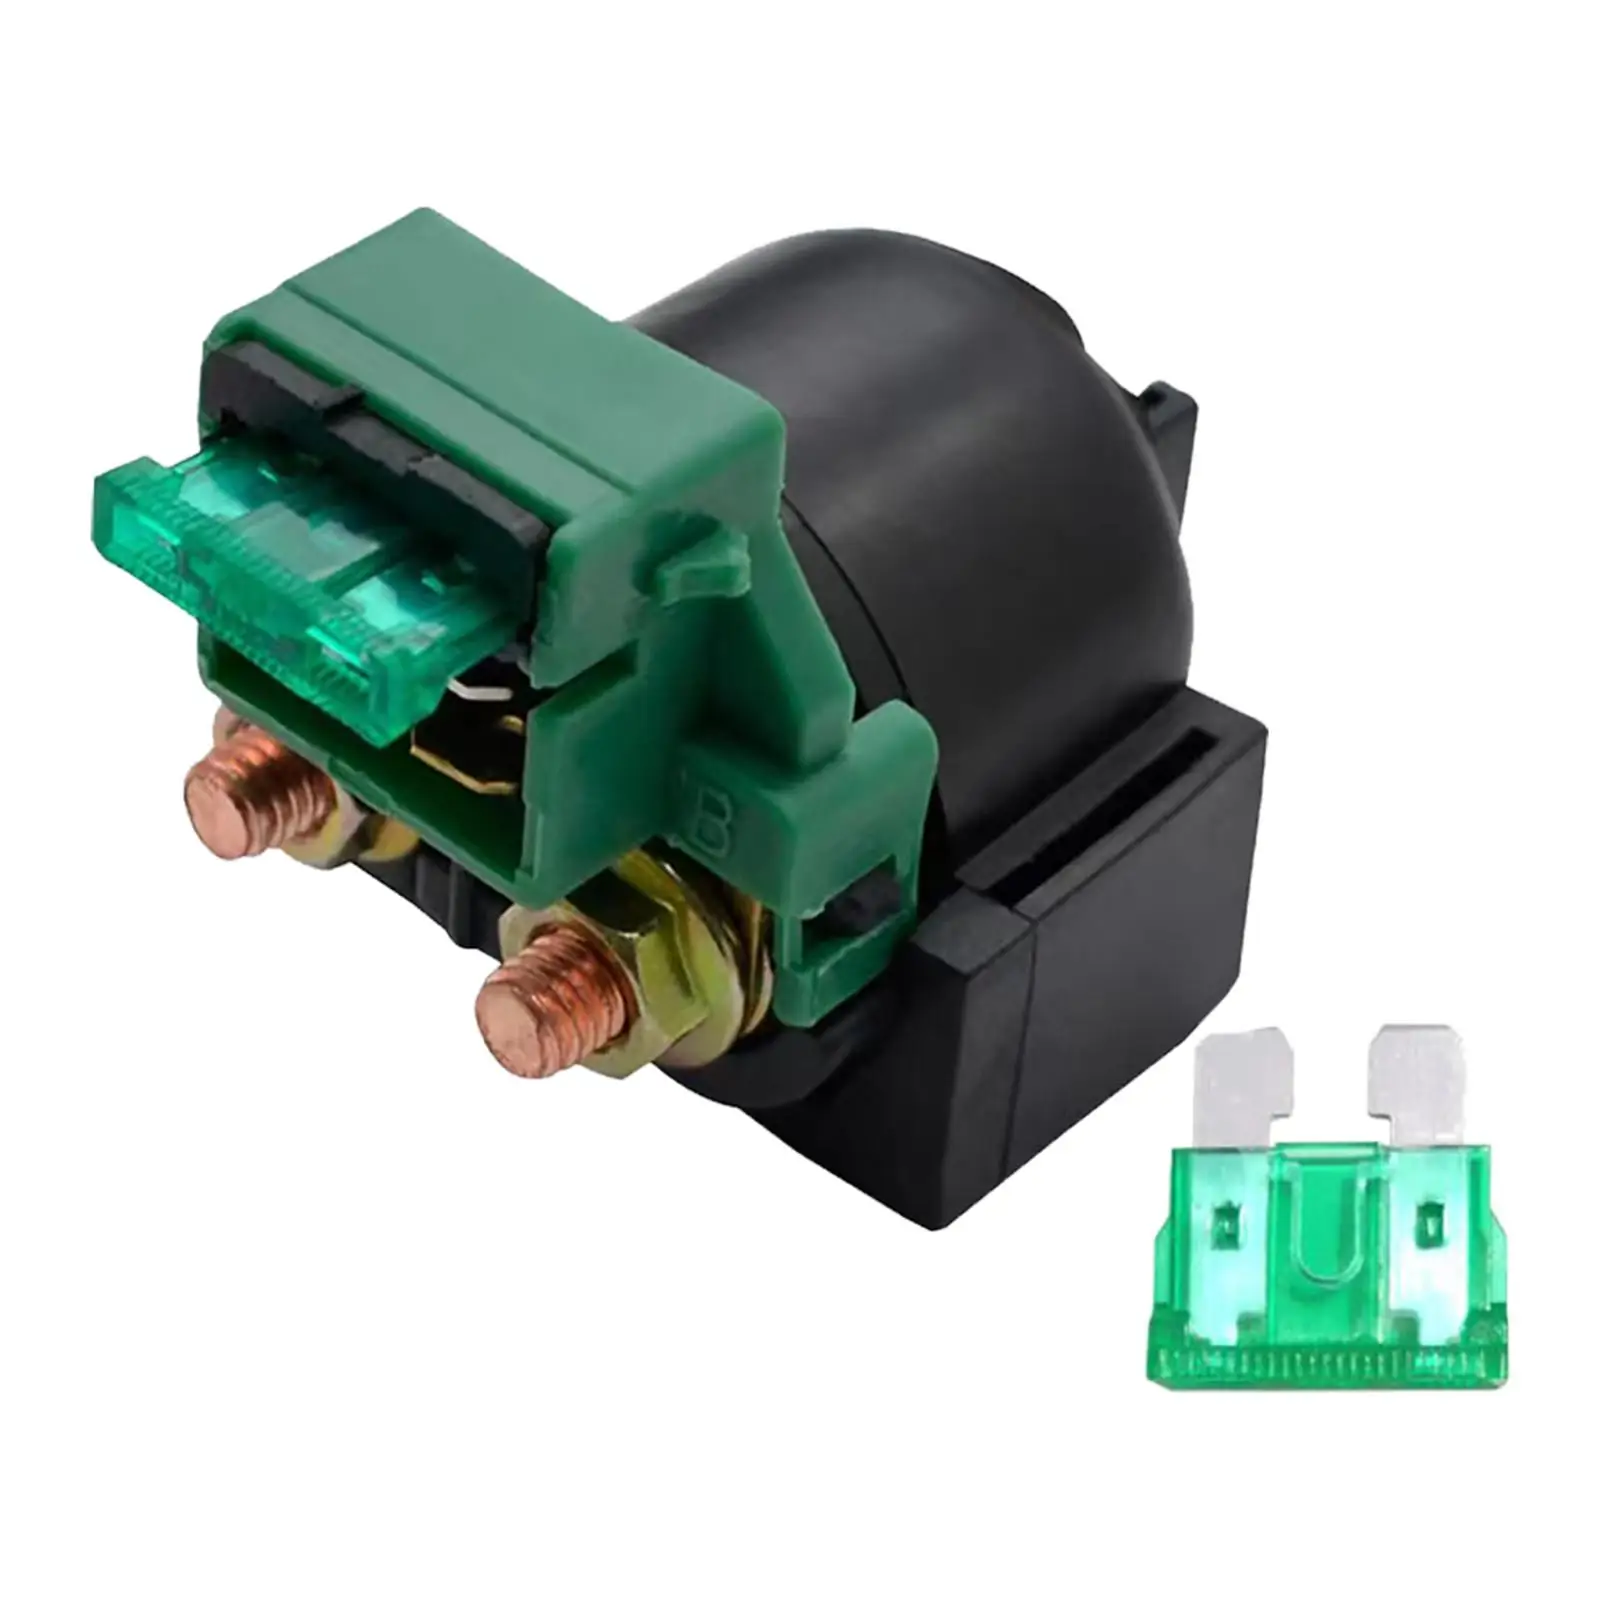 Starter Motor Solenoid Relay Electrical Relay Switch with Fuse Fit for Suzuki GS500 1990-09 Gw250 GSX250R DL250 Parts Supplies